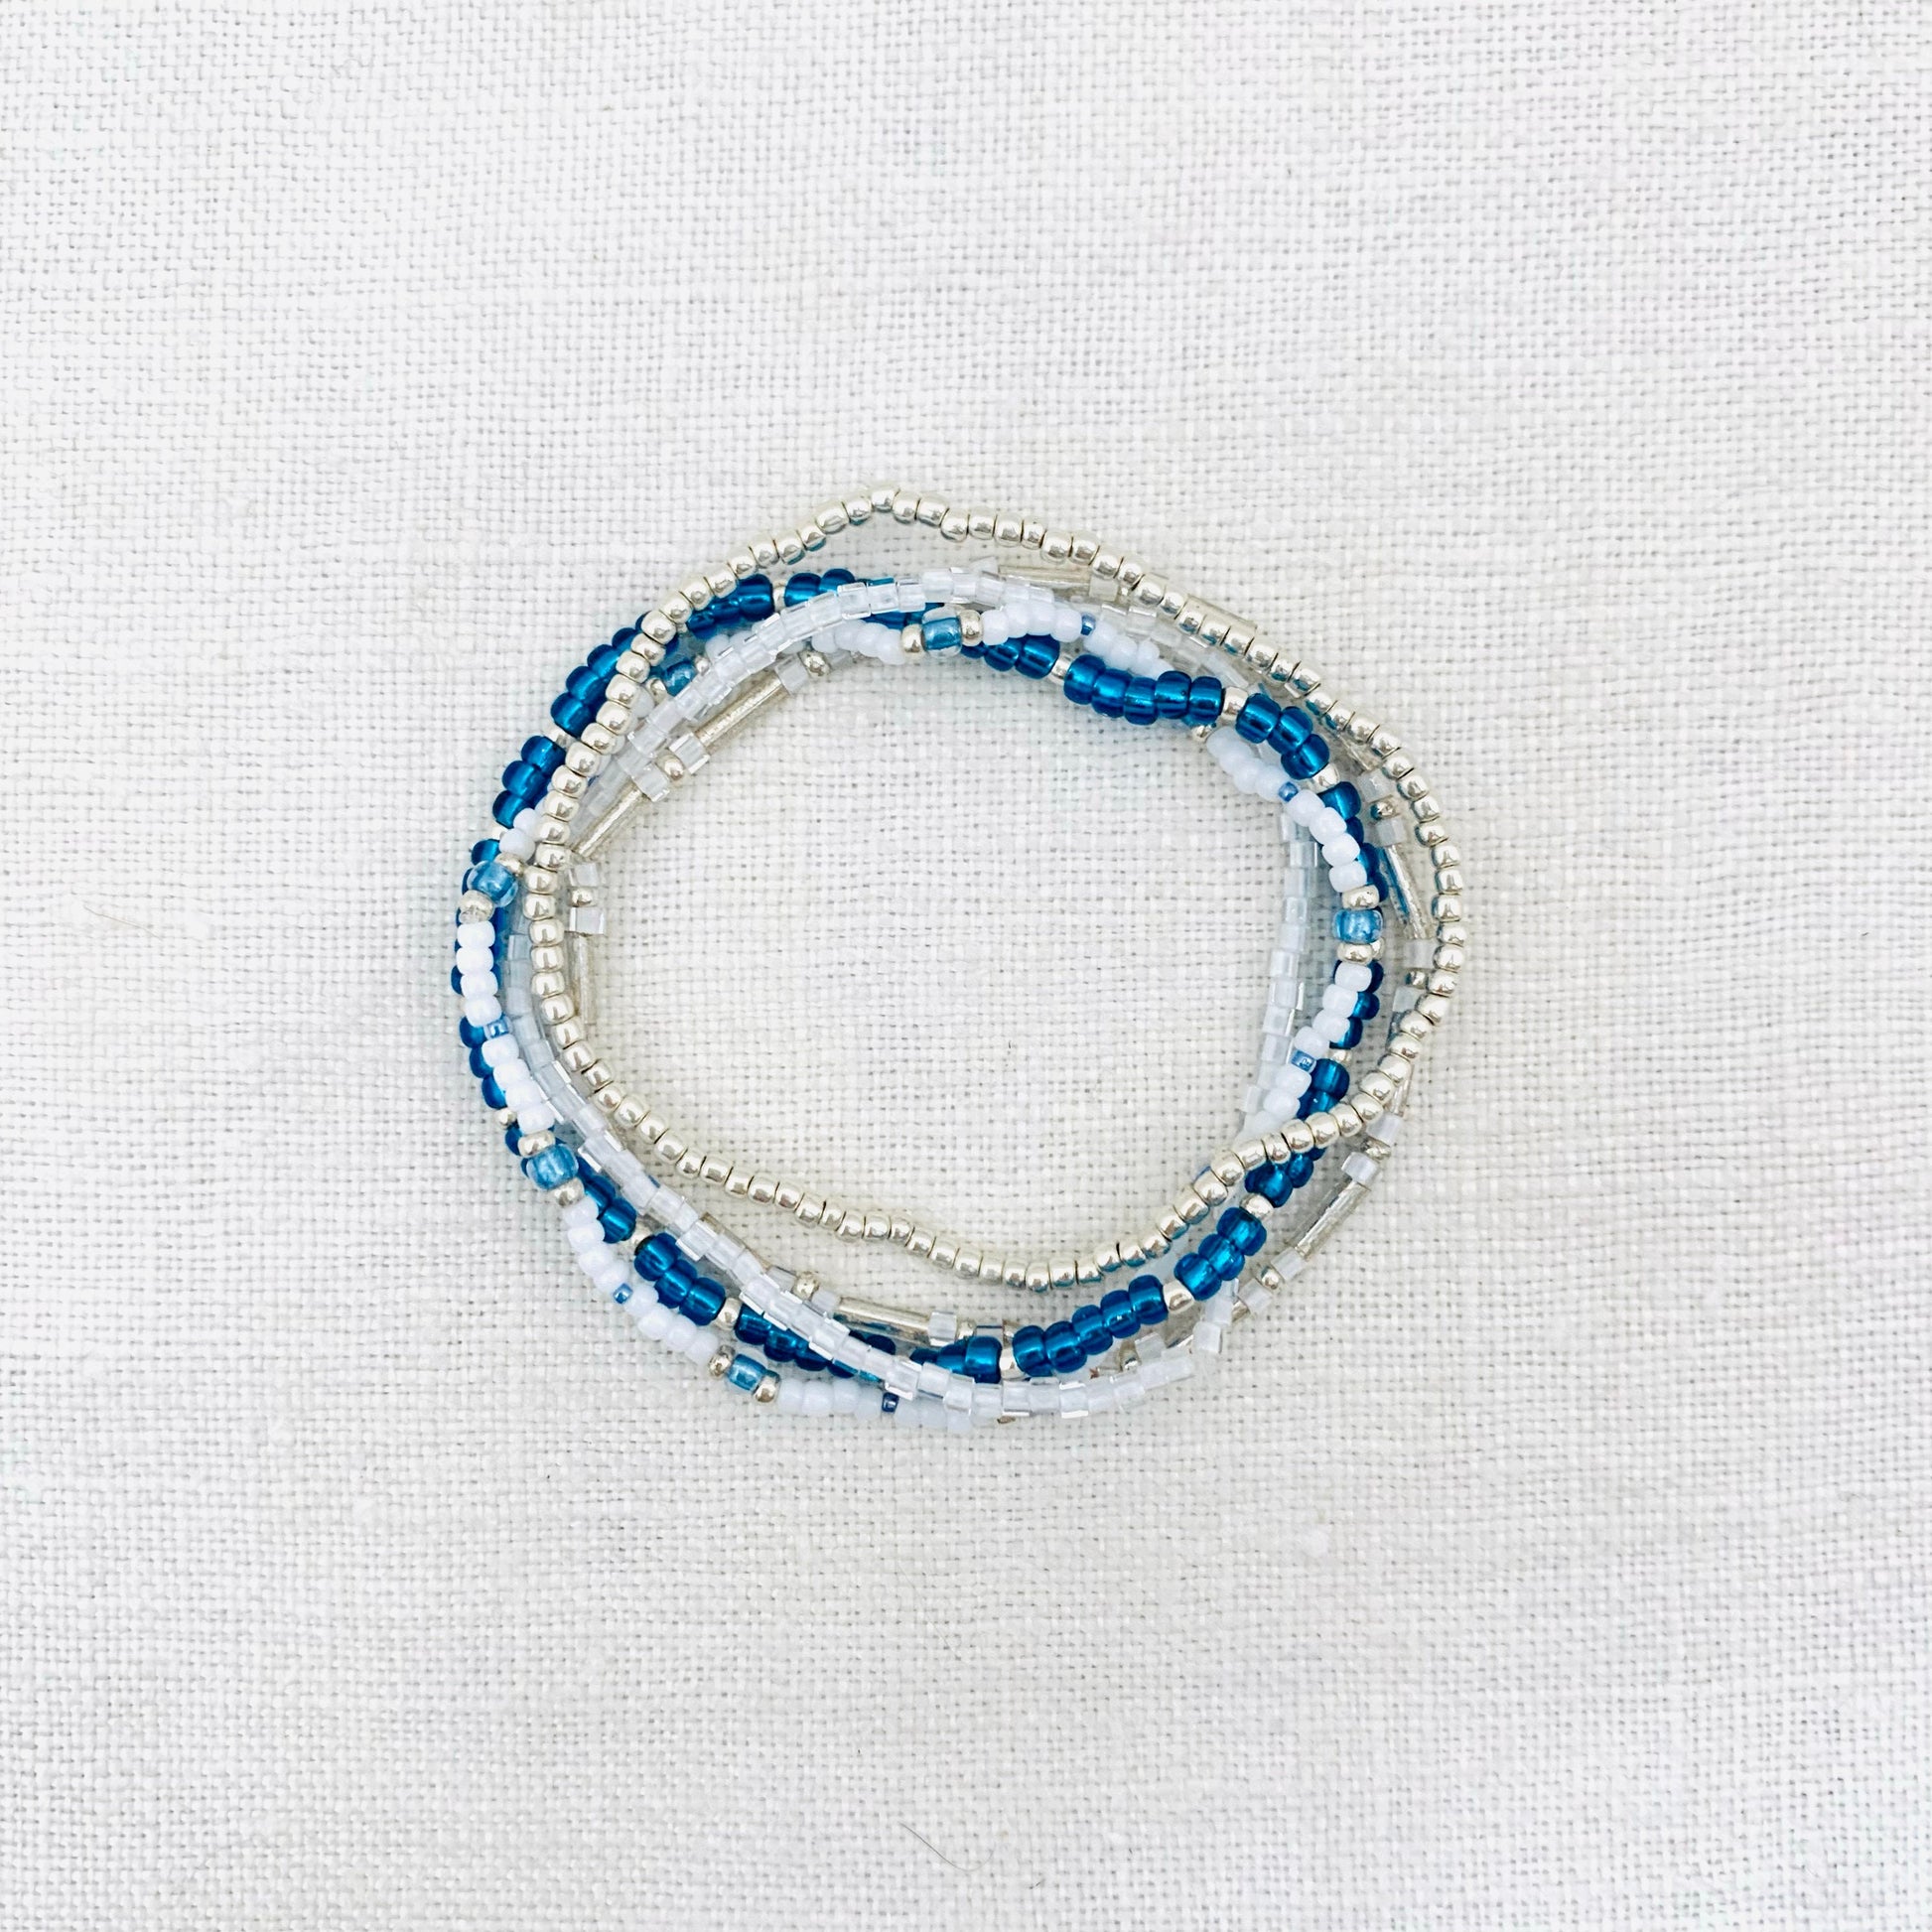 Santorini Bracelet with white and blue glass beads – Shop